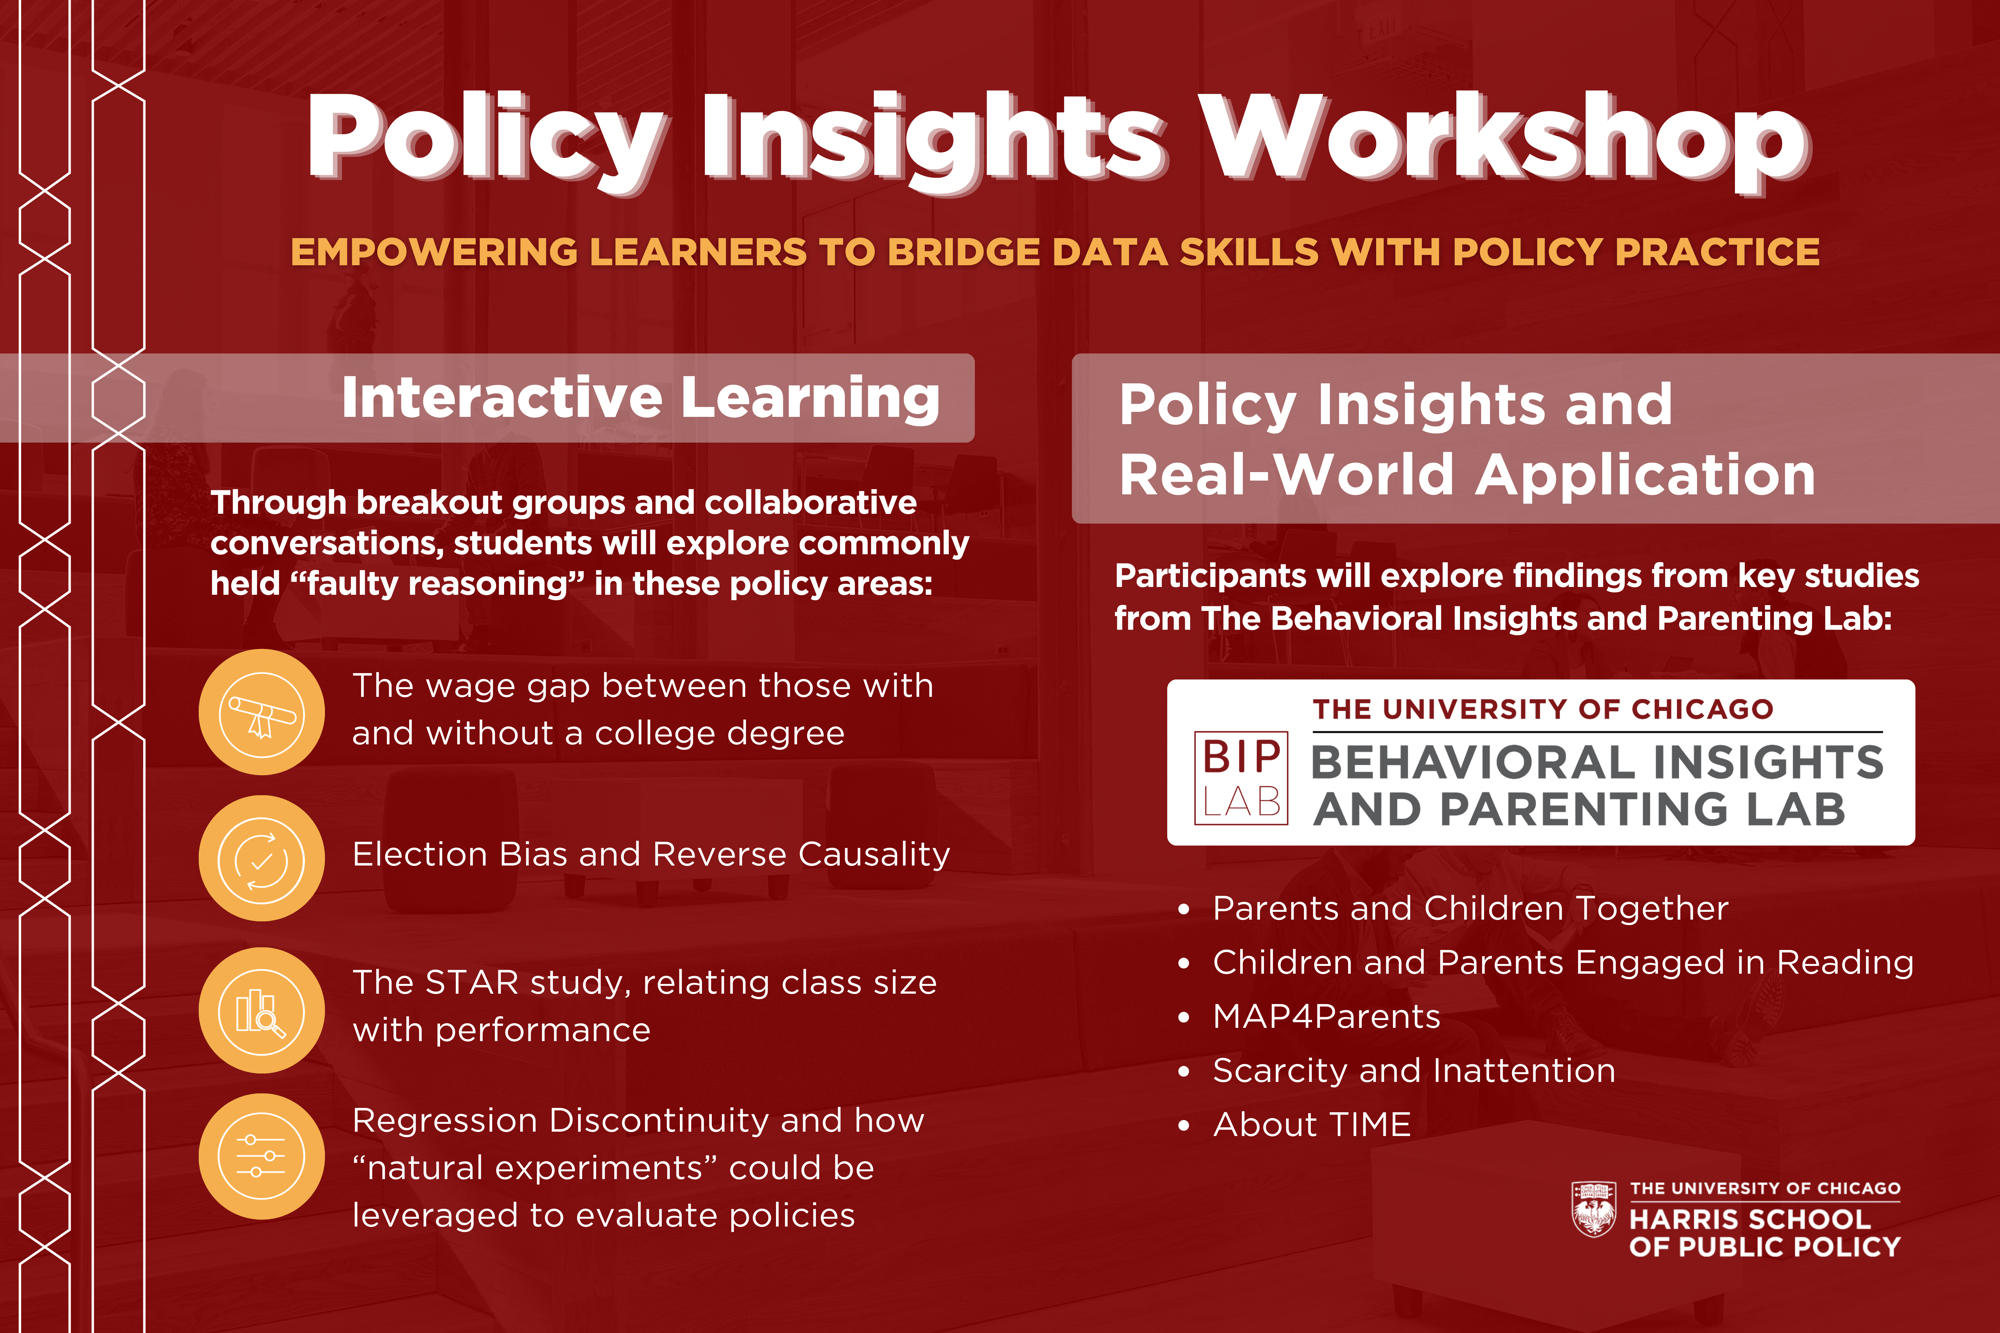 PAC Policy Insights Workshop